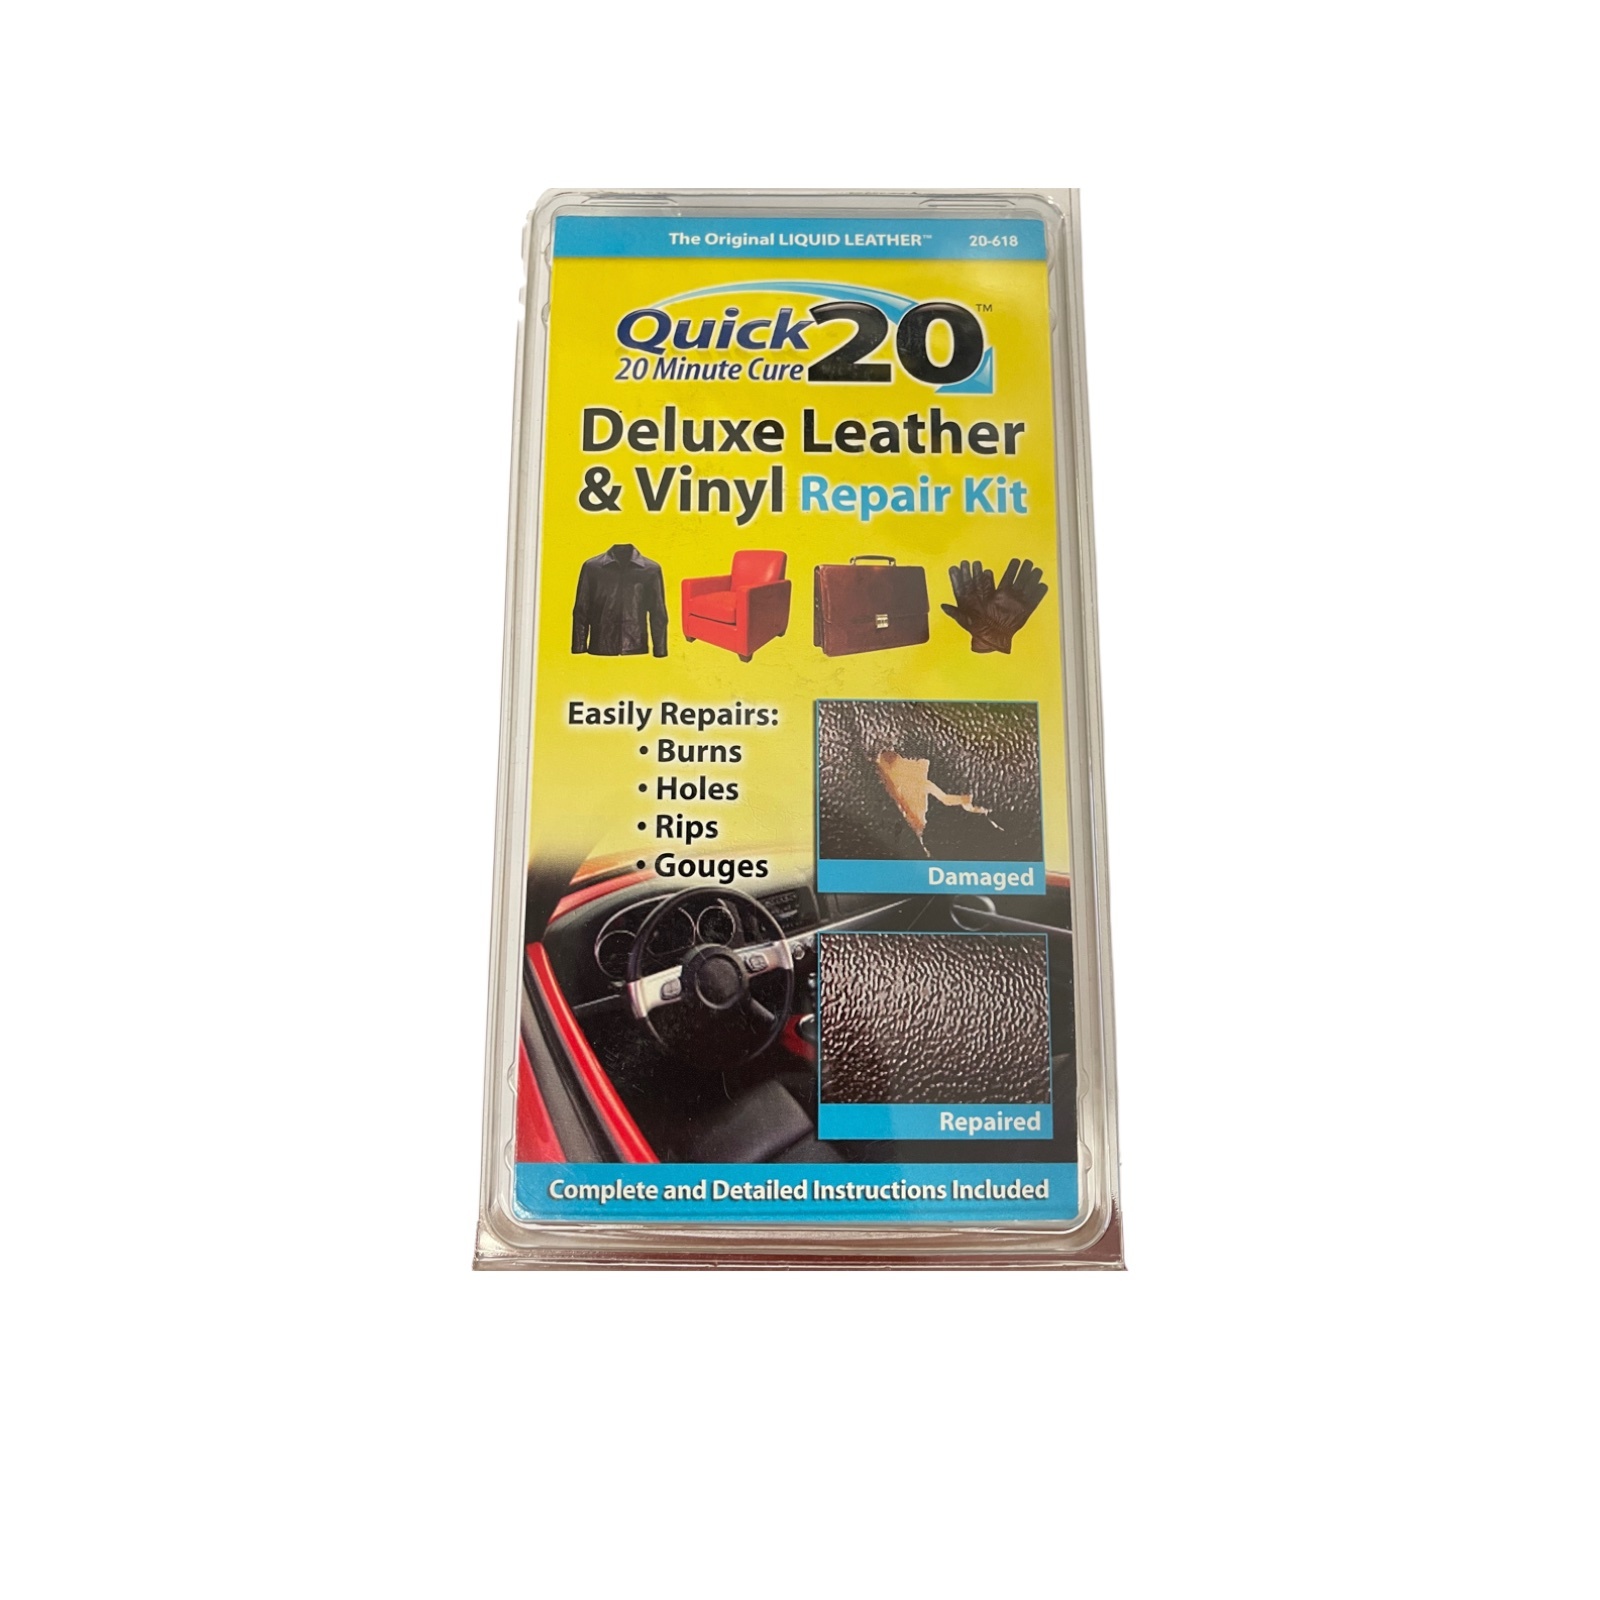 Primary image for Quick 20 Deluxe Leather & Vinyl Repair Kit (20-618)